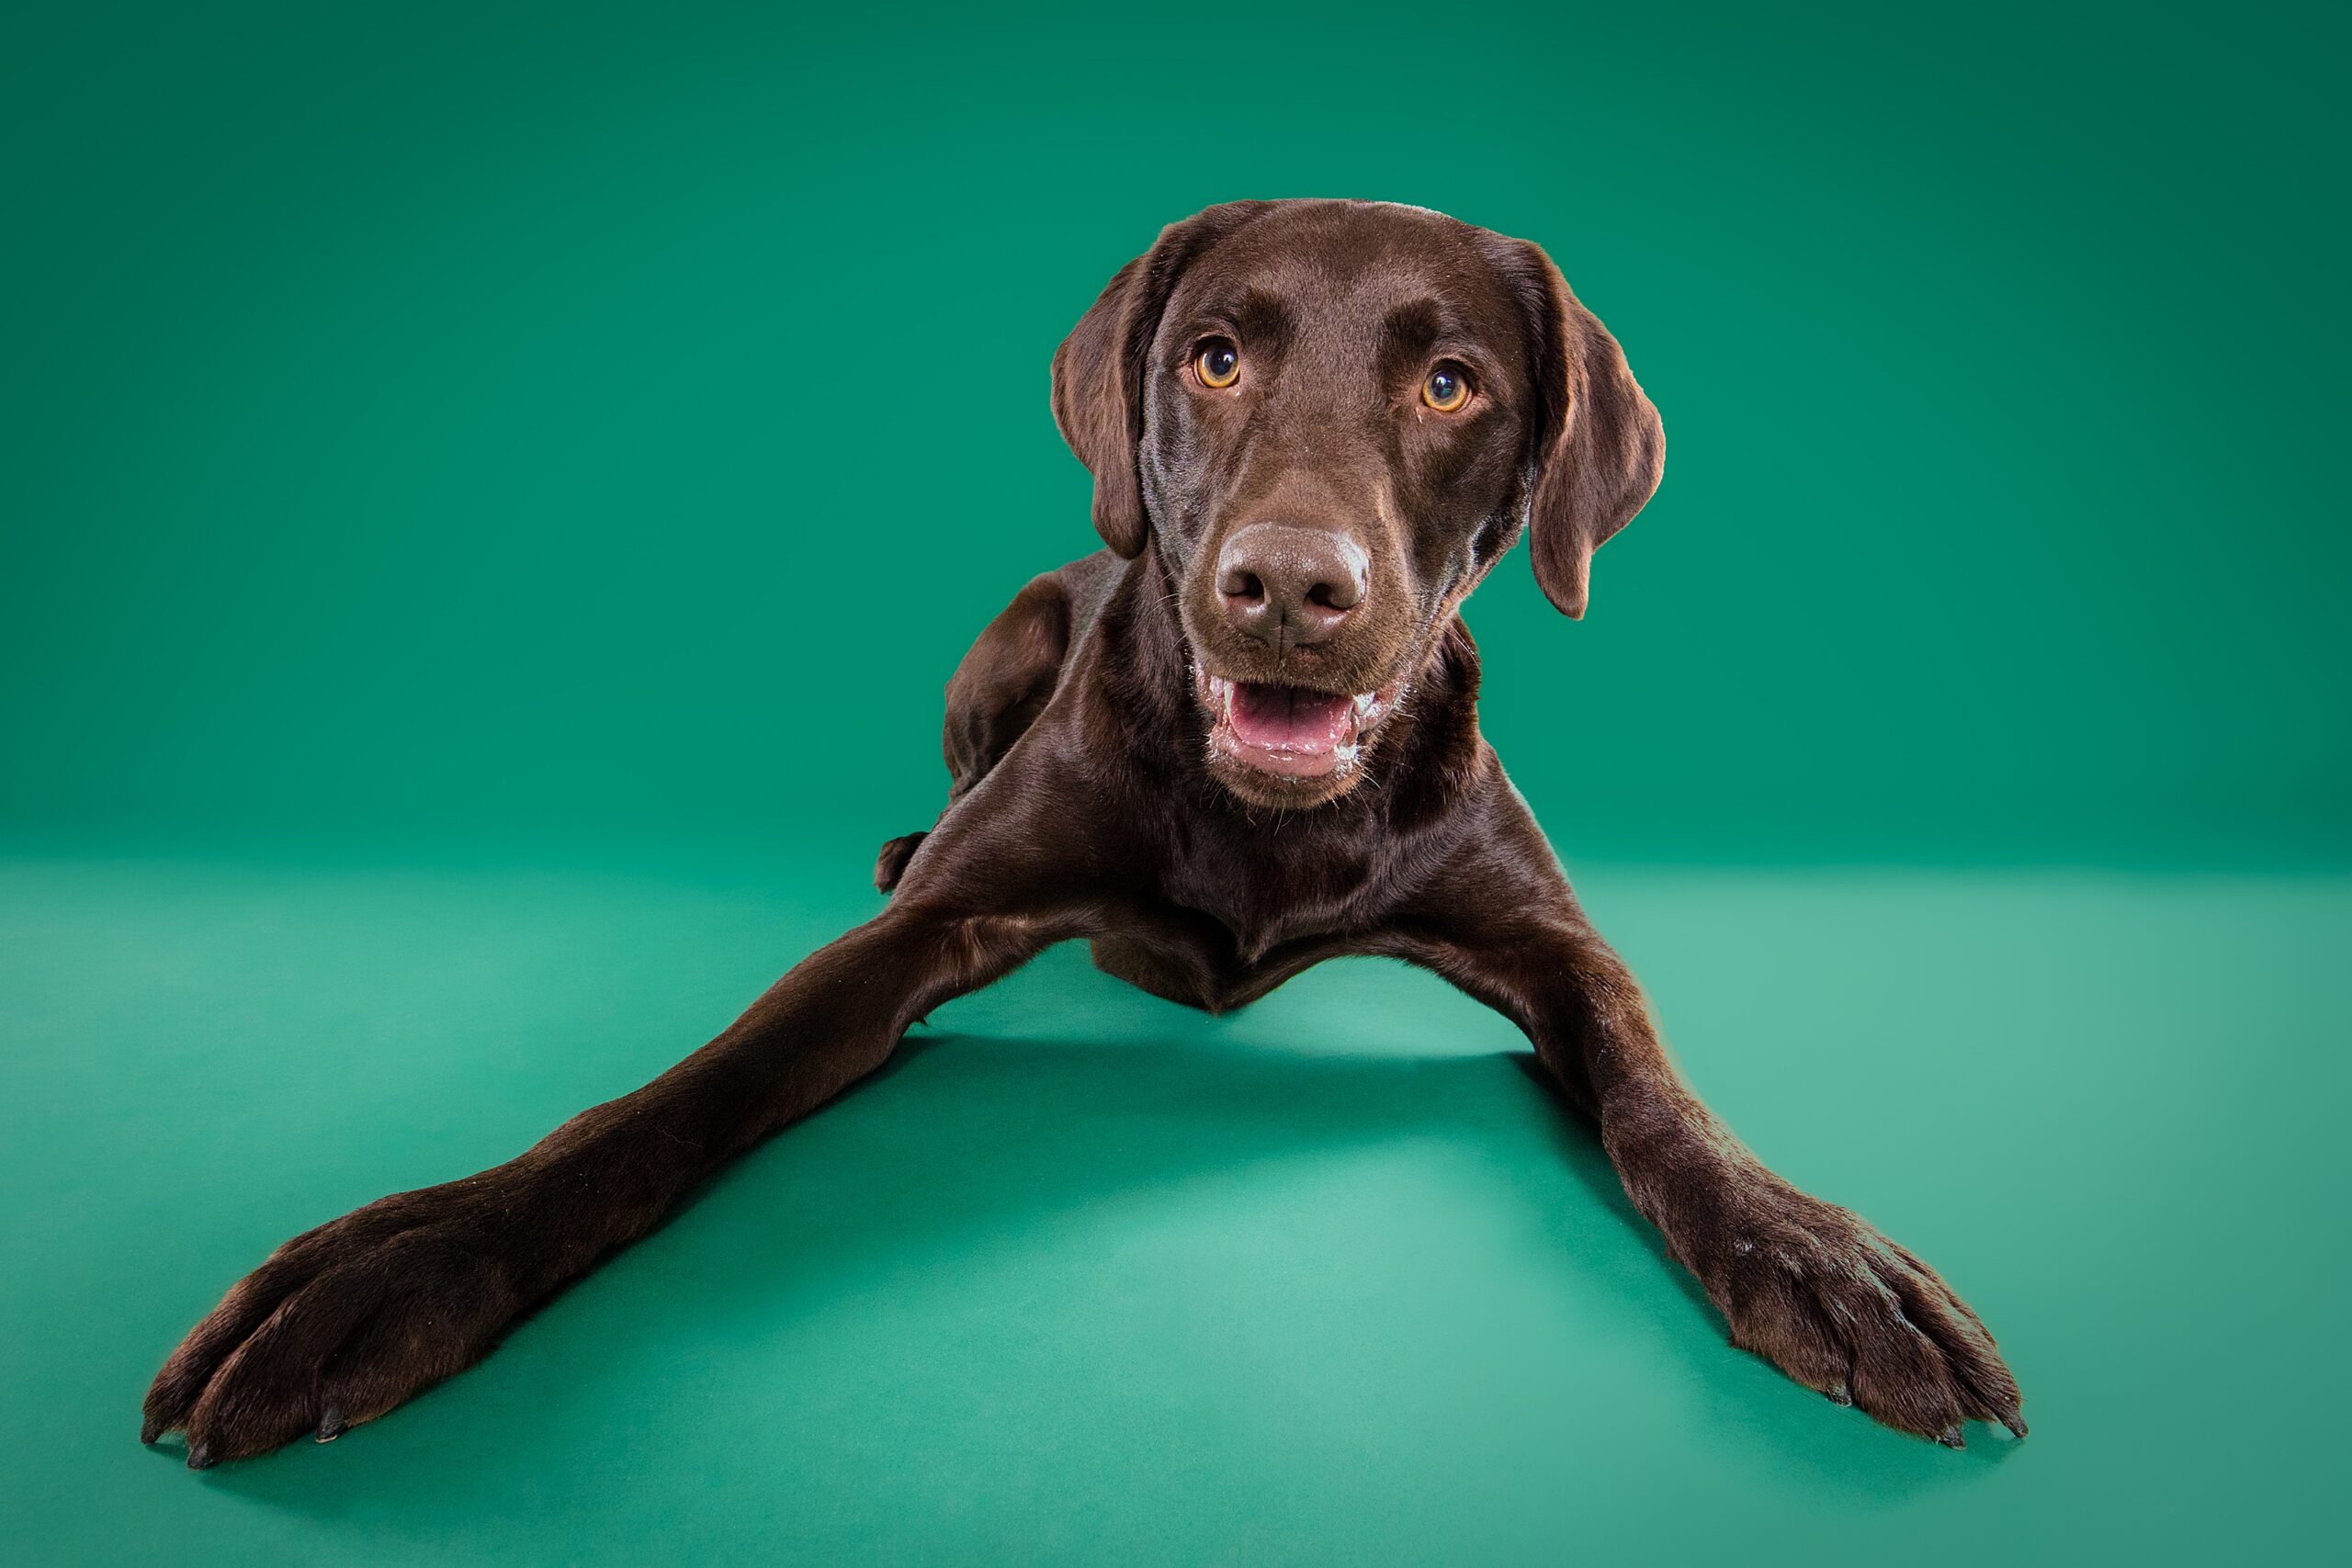 The Beloved Pup Photo Studio- Alabama & South Eastern US Dog Photographer - Moose the Chocolate Lab